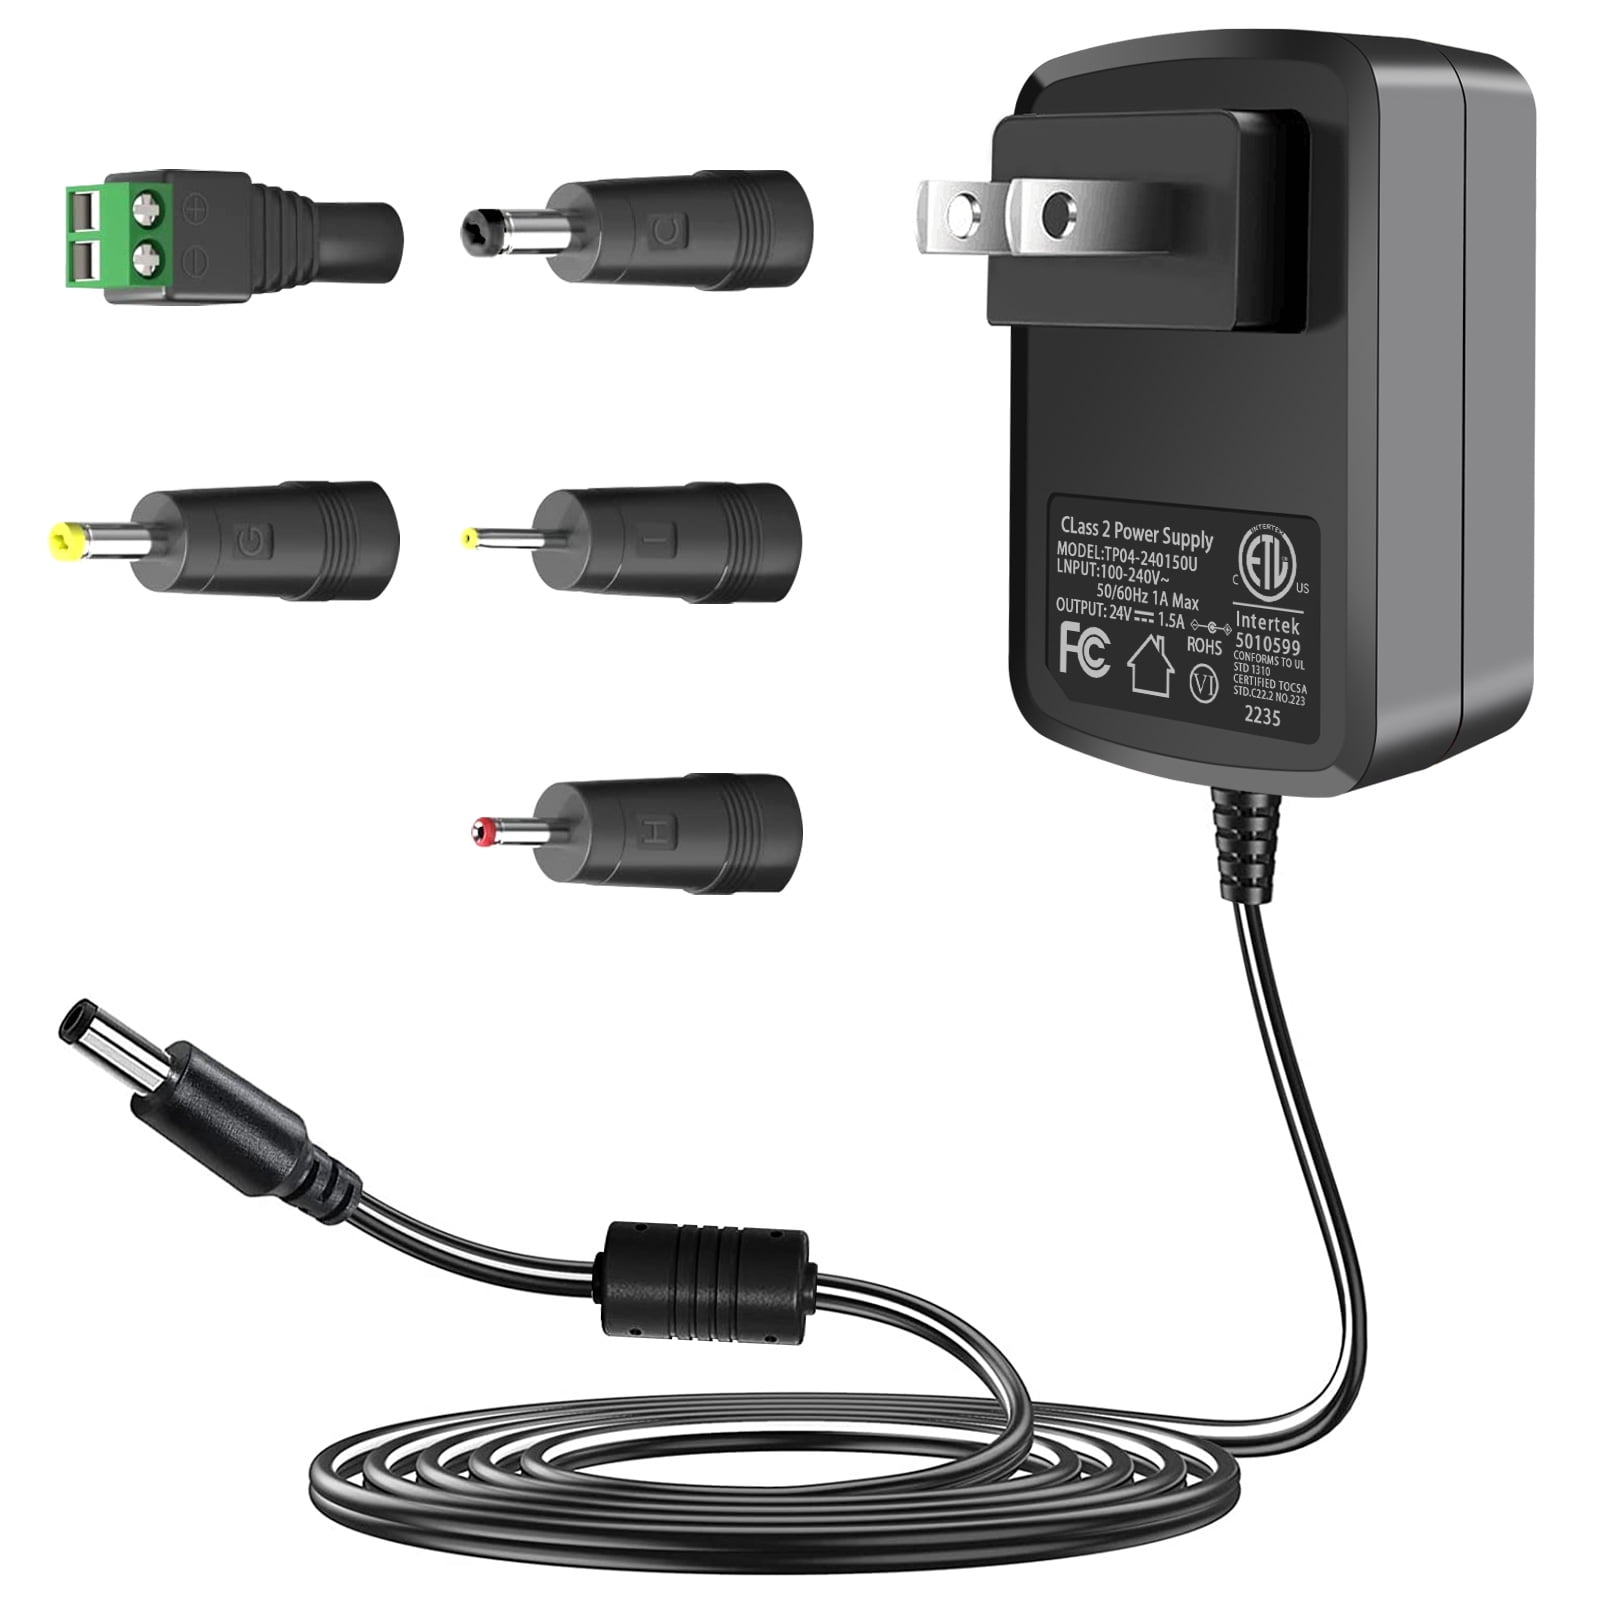 12V 1A Power Supply Adapter, 100-240V 50/60Hz AC to DC 12V 1A/1000mA 12W  Universal Wall Charger with 5.5mm*2.1mm US Plug, Center Positive, ETL FCC